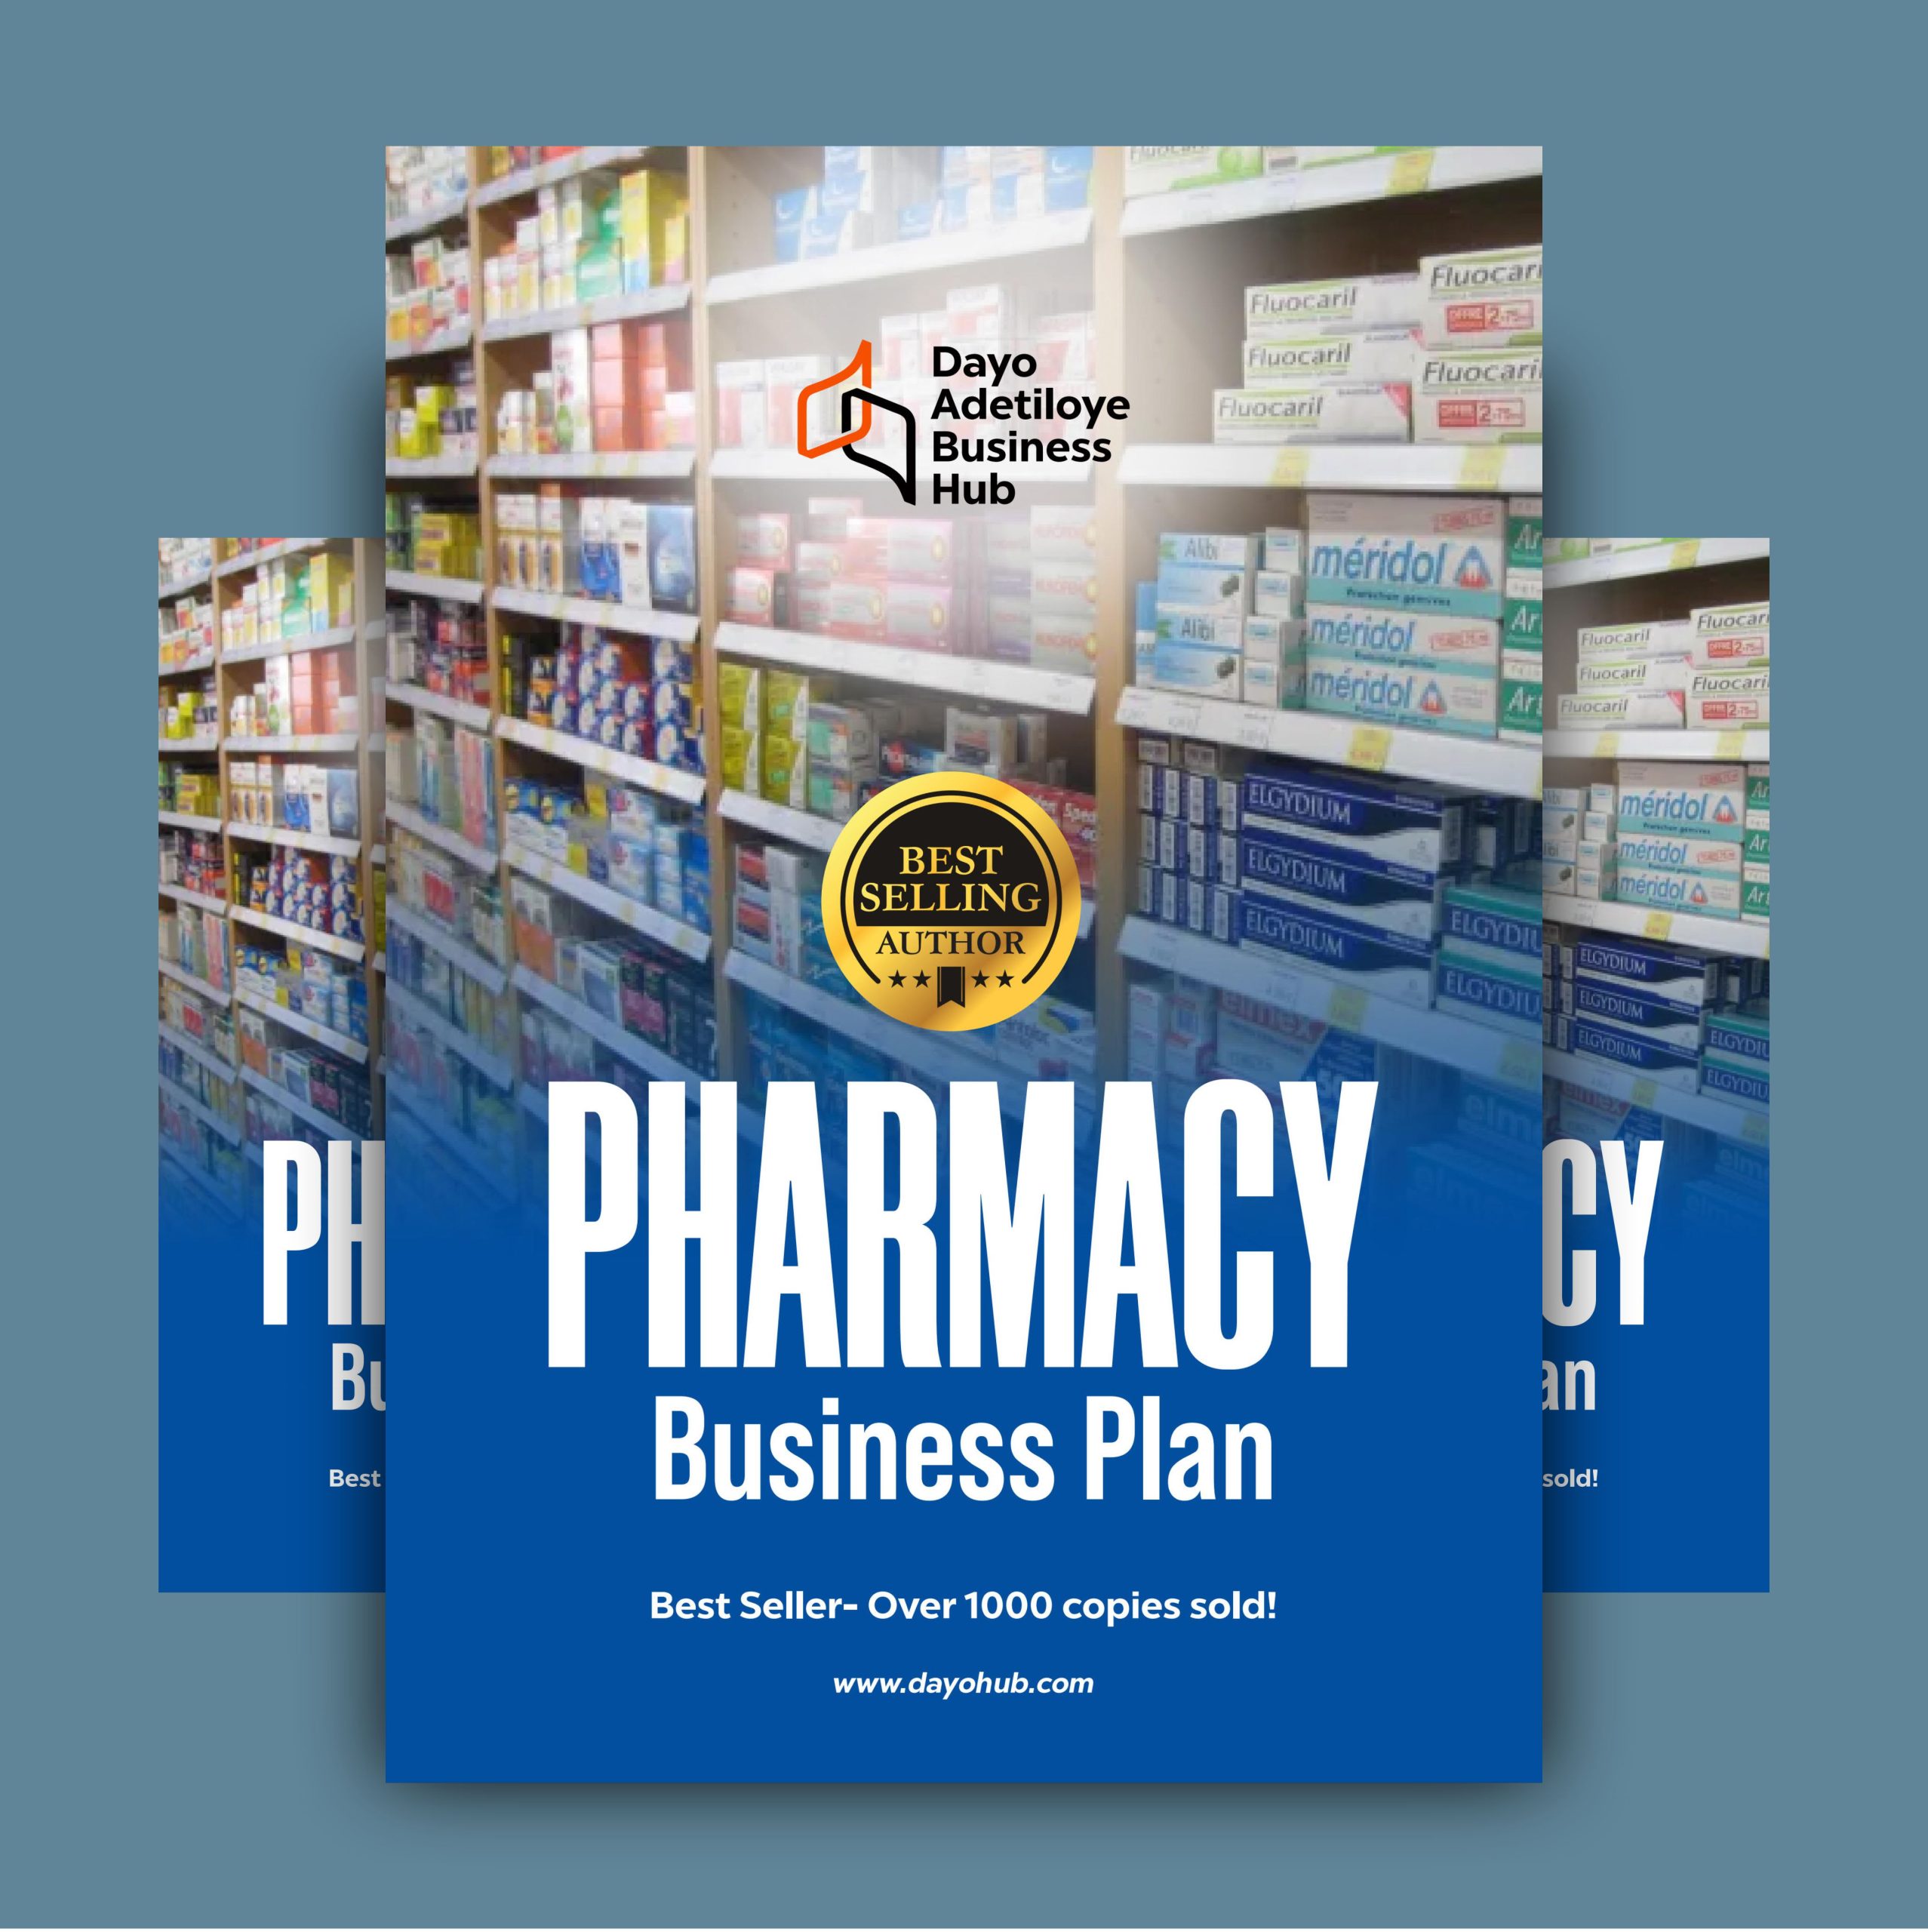 business plan for pharmacy in nigeria